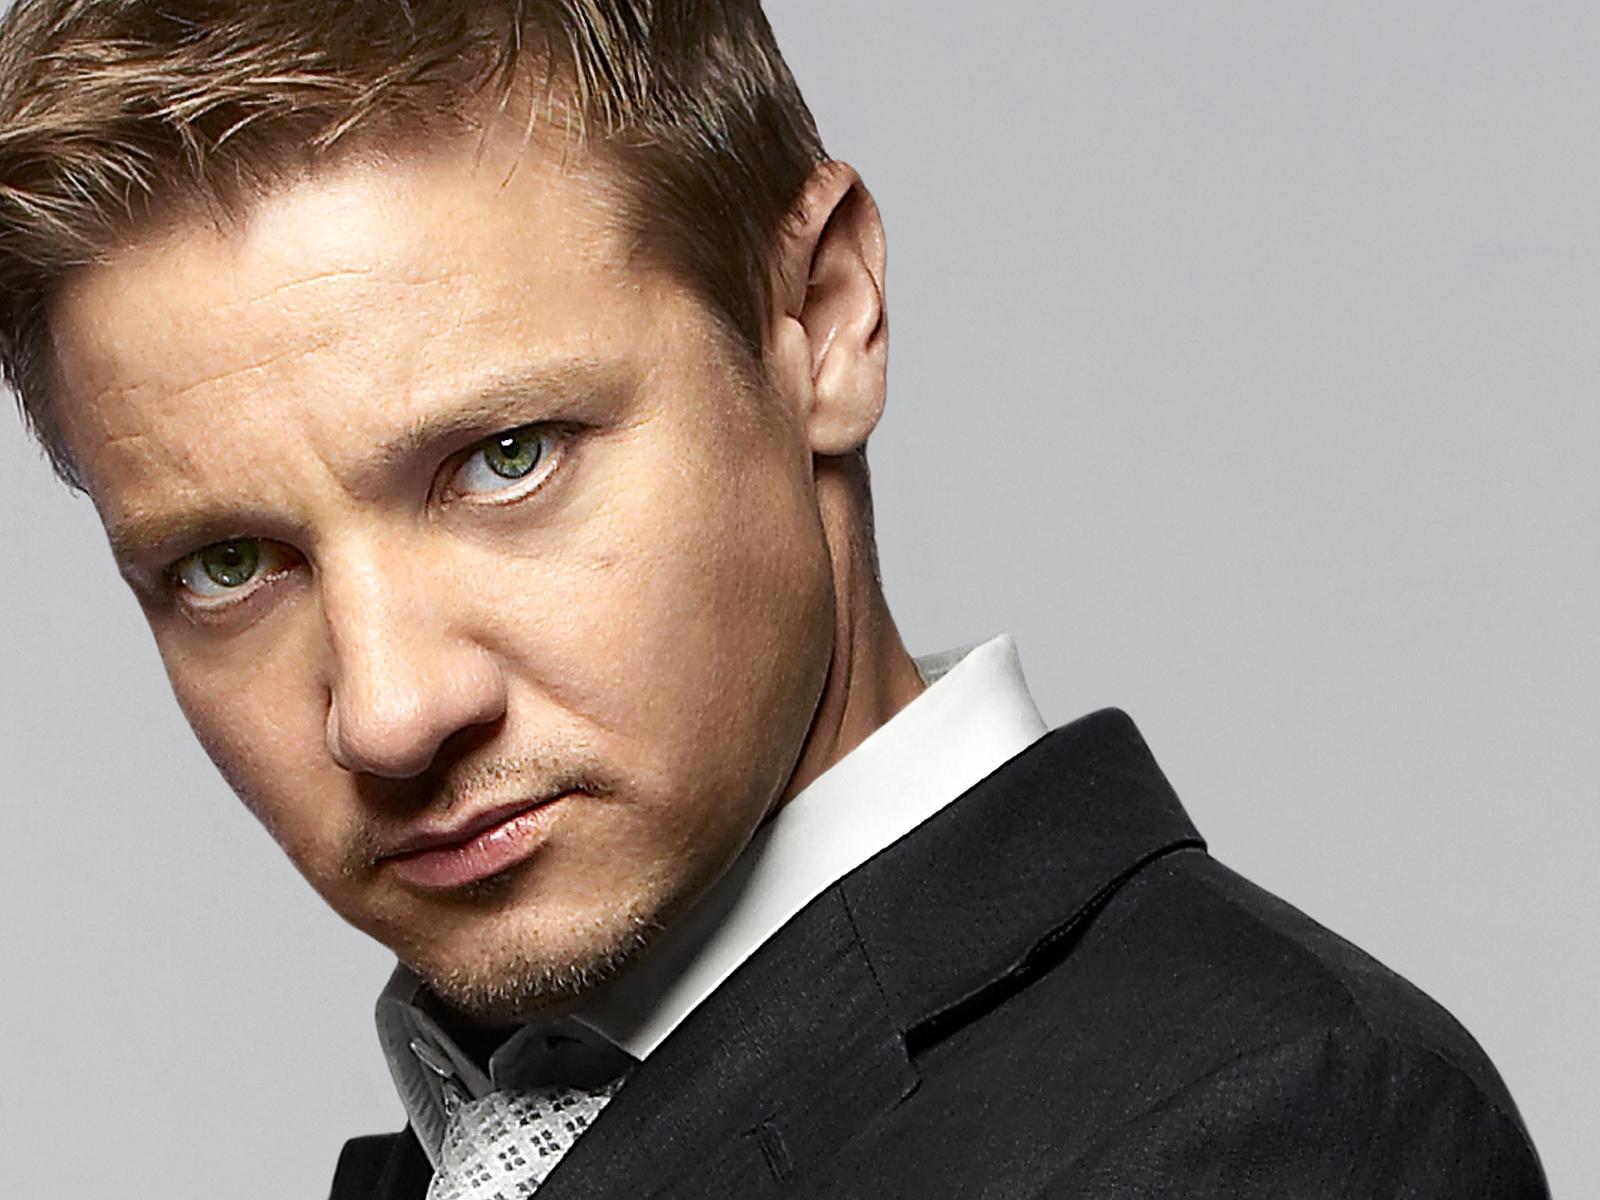 Jeremy Renner Backgrounds, Compatible - PC, Mobile, Gadgets| 1600x1200 px